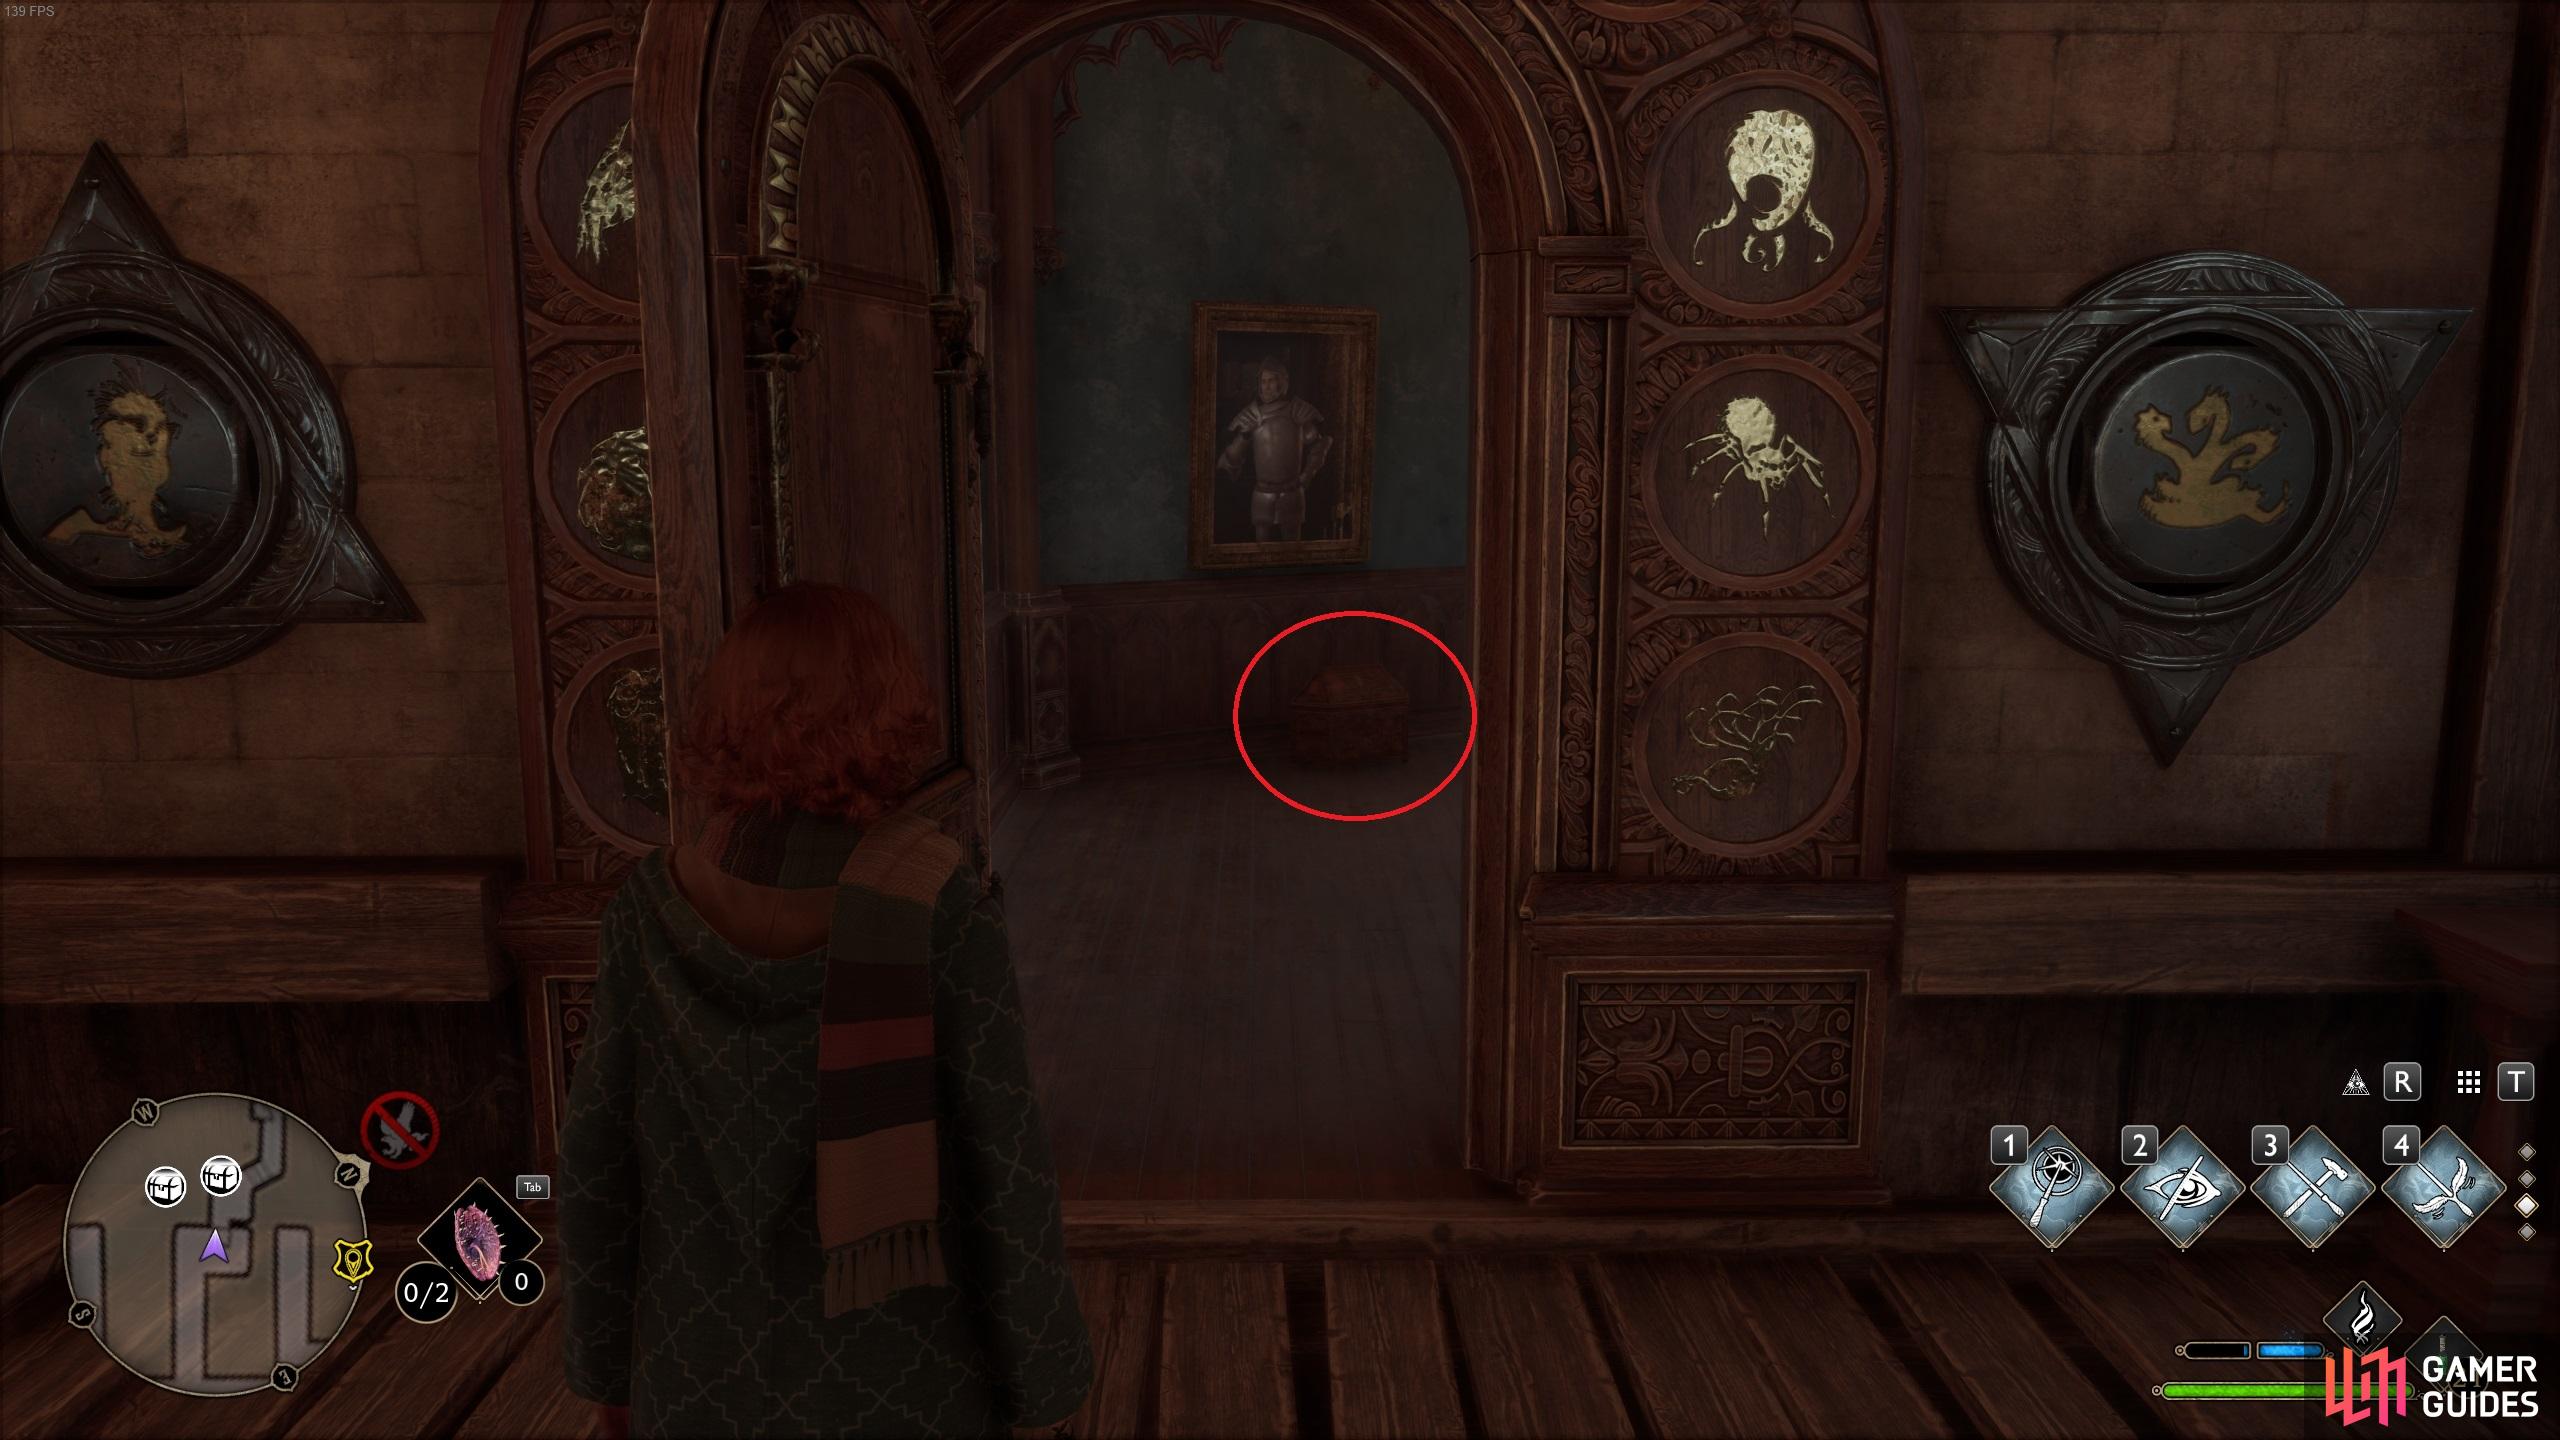 You'll find the Collection Chest on the other side of the door puzzle.